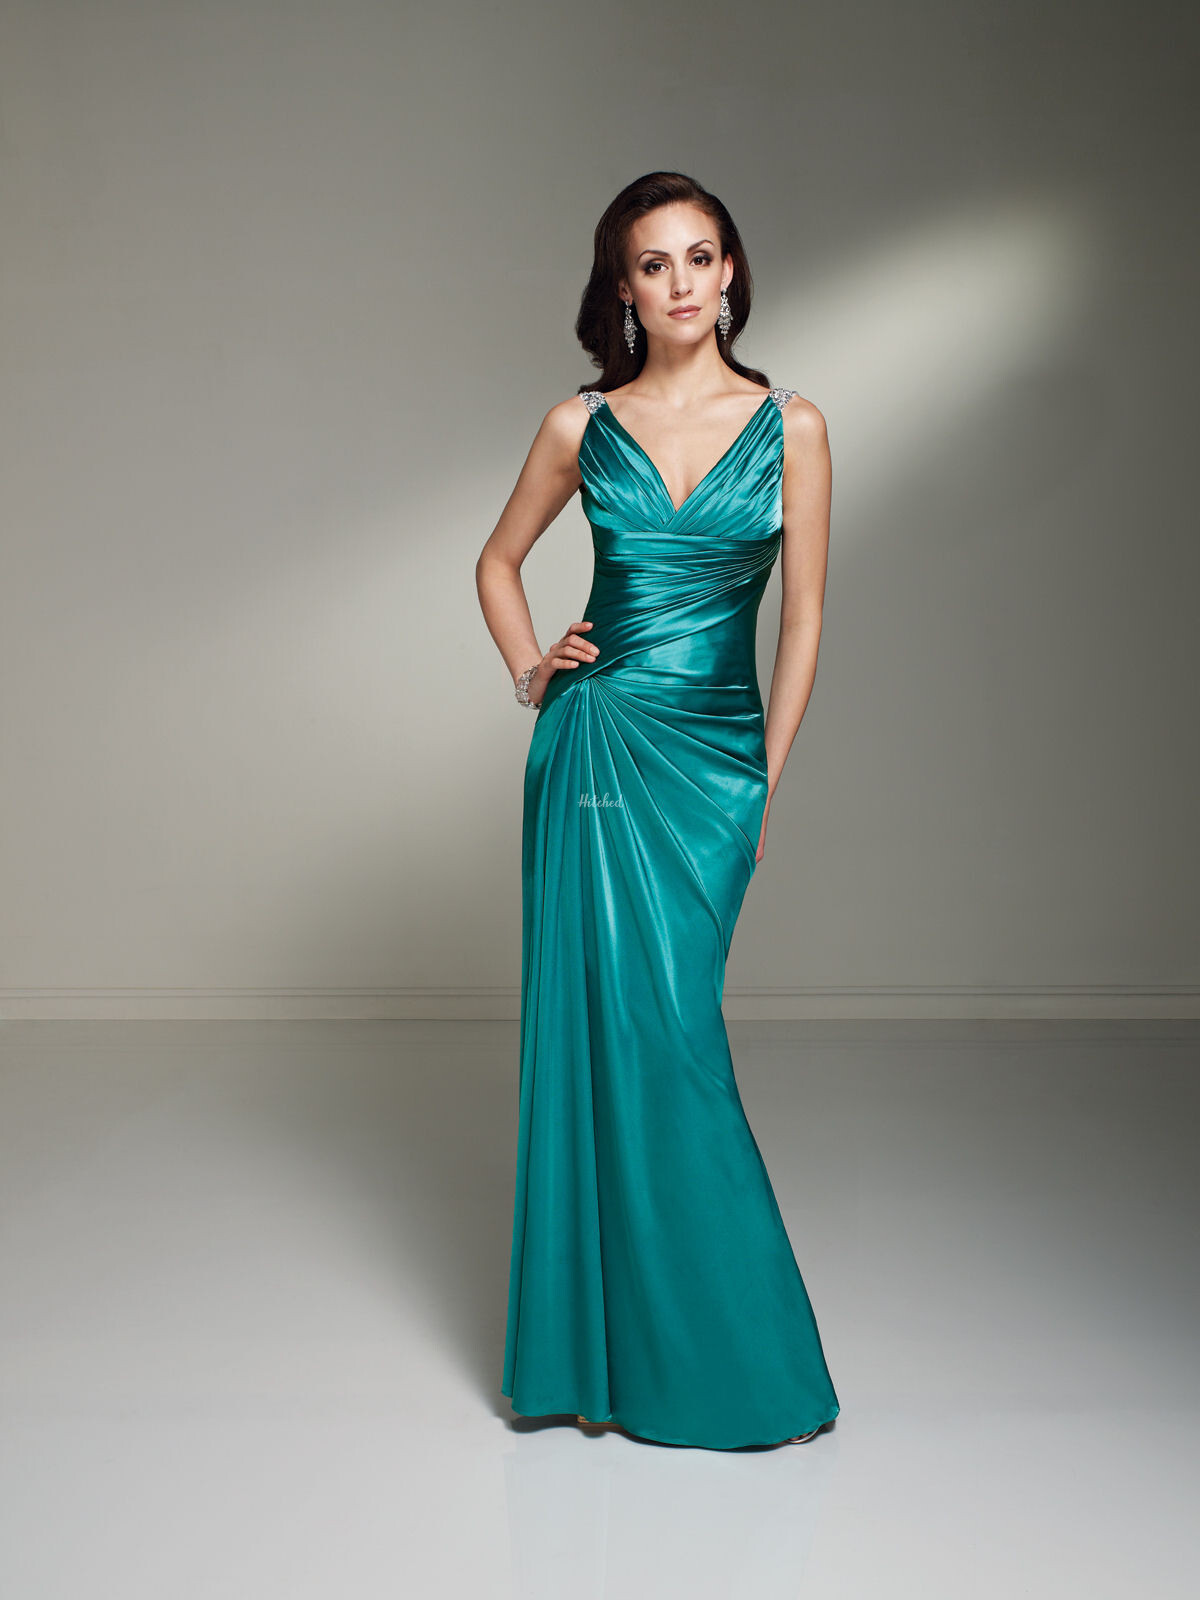 BY21266 Bridesmaid Dress from Sophia Tolli - hitched.co.uk